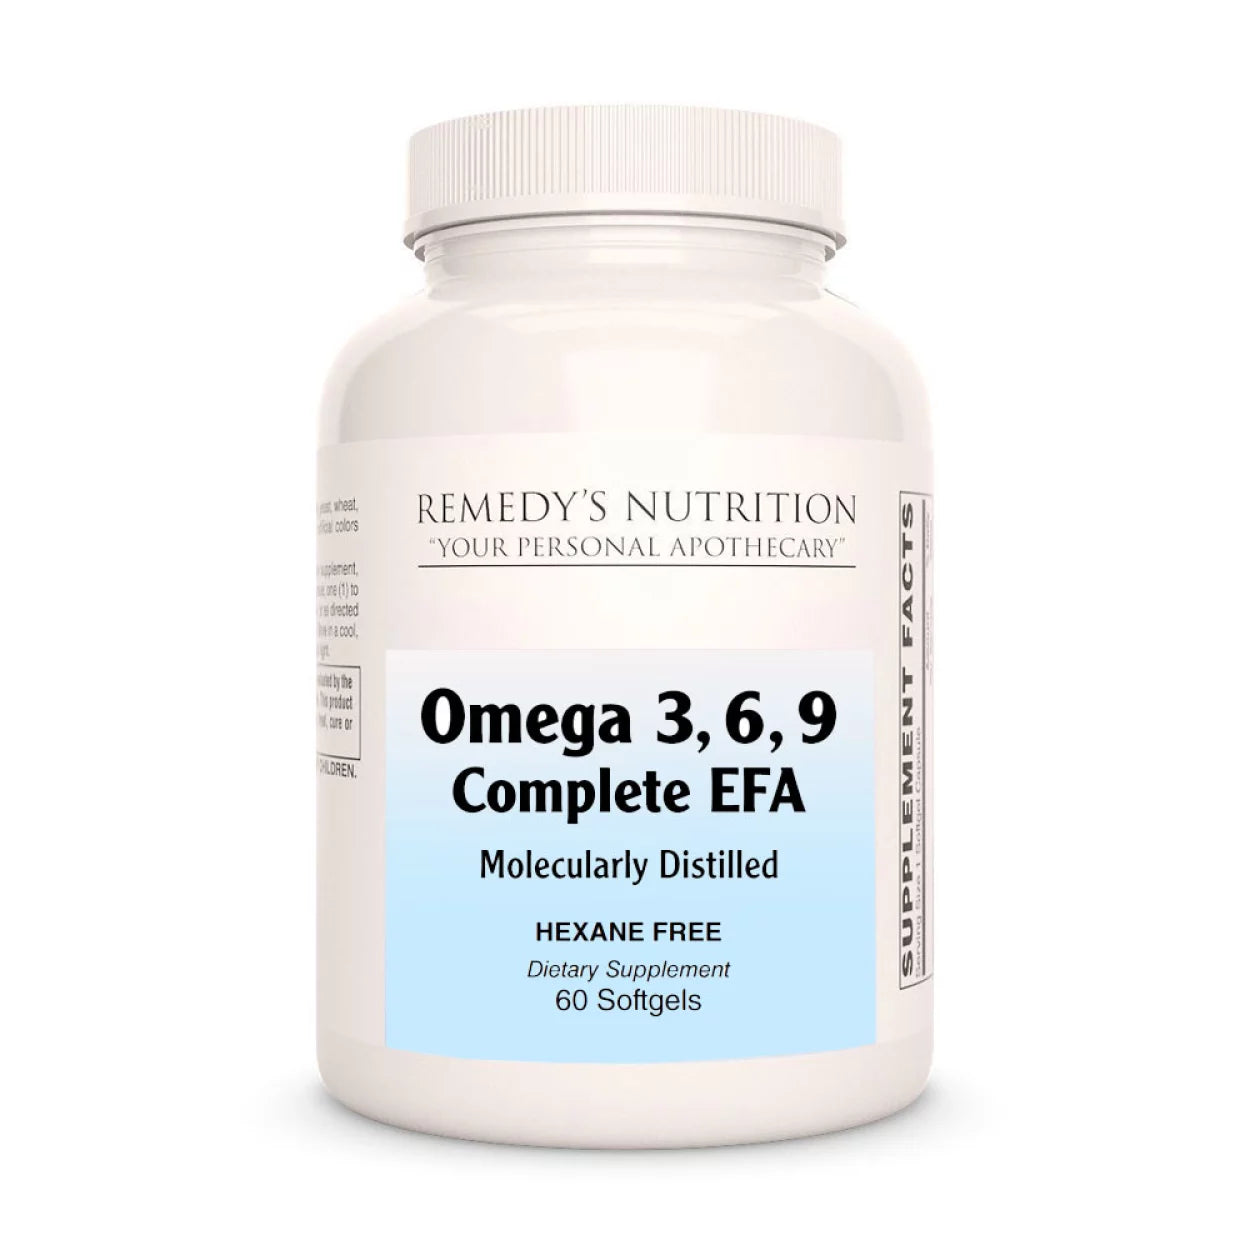 Image of Remedy's Nutrition® Omega 3, 6, 9 Capsules Dietary Supplement front bottle.  Complete EFA Essential Fatty Acids.